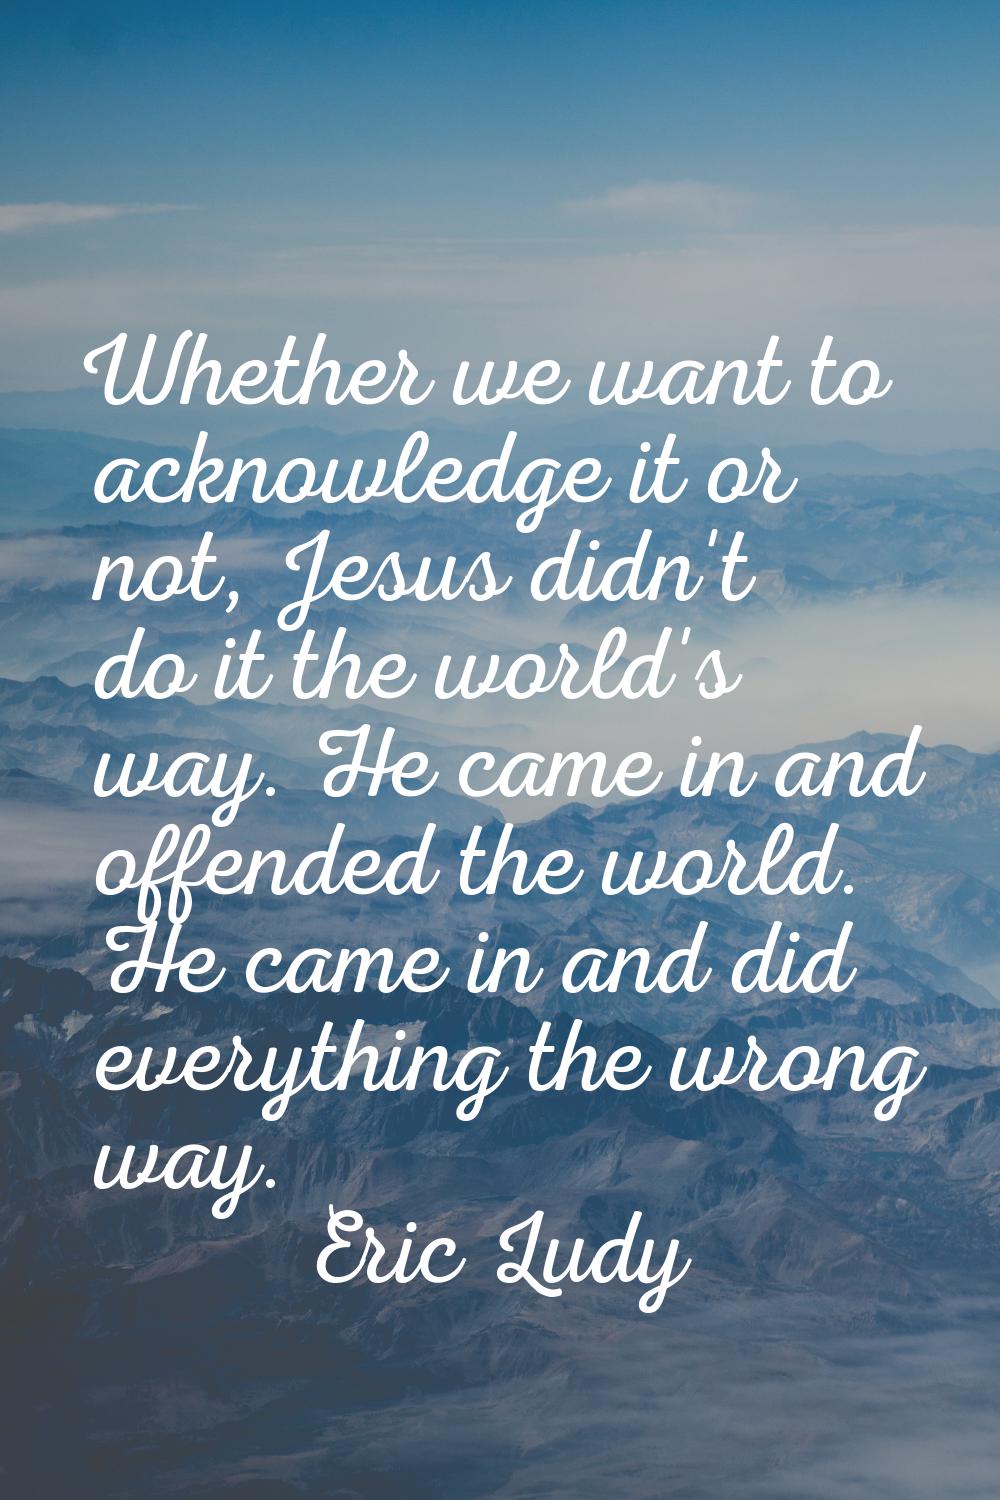 Whether we want to acknowledge it or not, Jesus didn't do it the world's way. He came in and offend